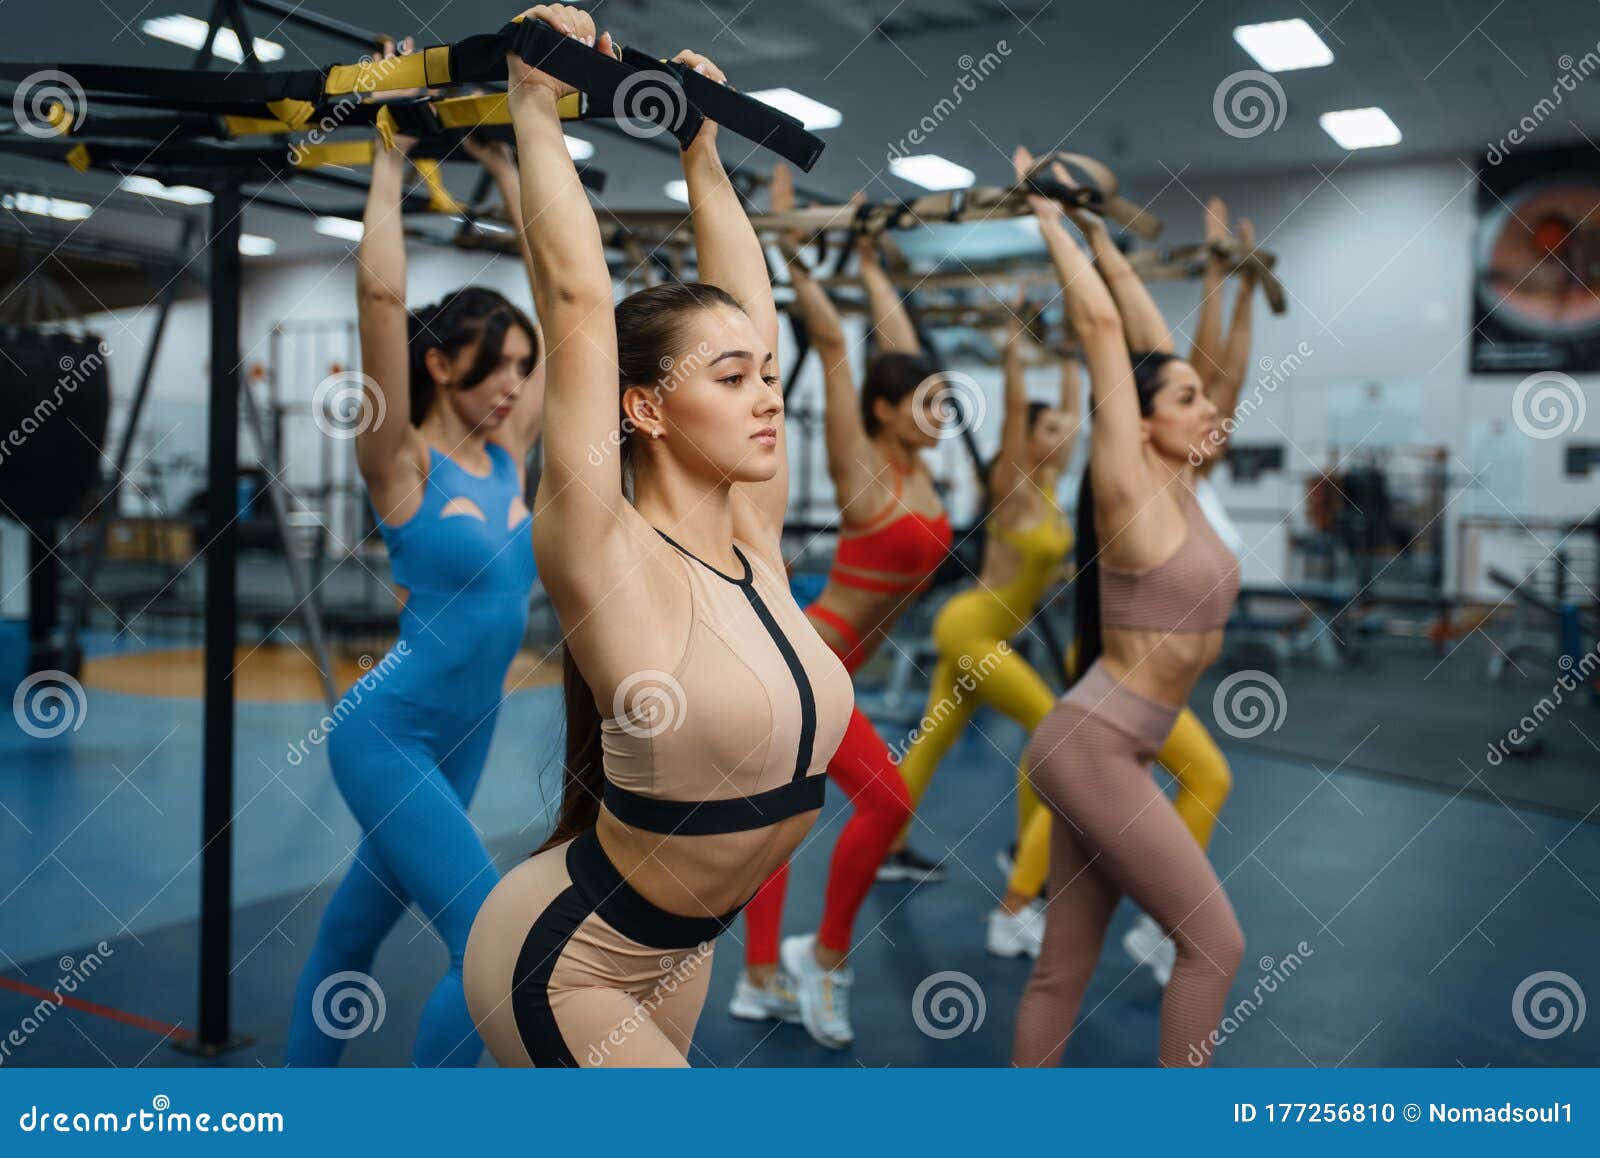 Group of Muscular Women Doing Exercise in Gym Stock Photo - Image